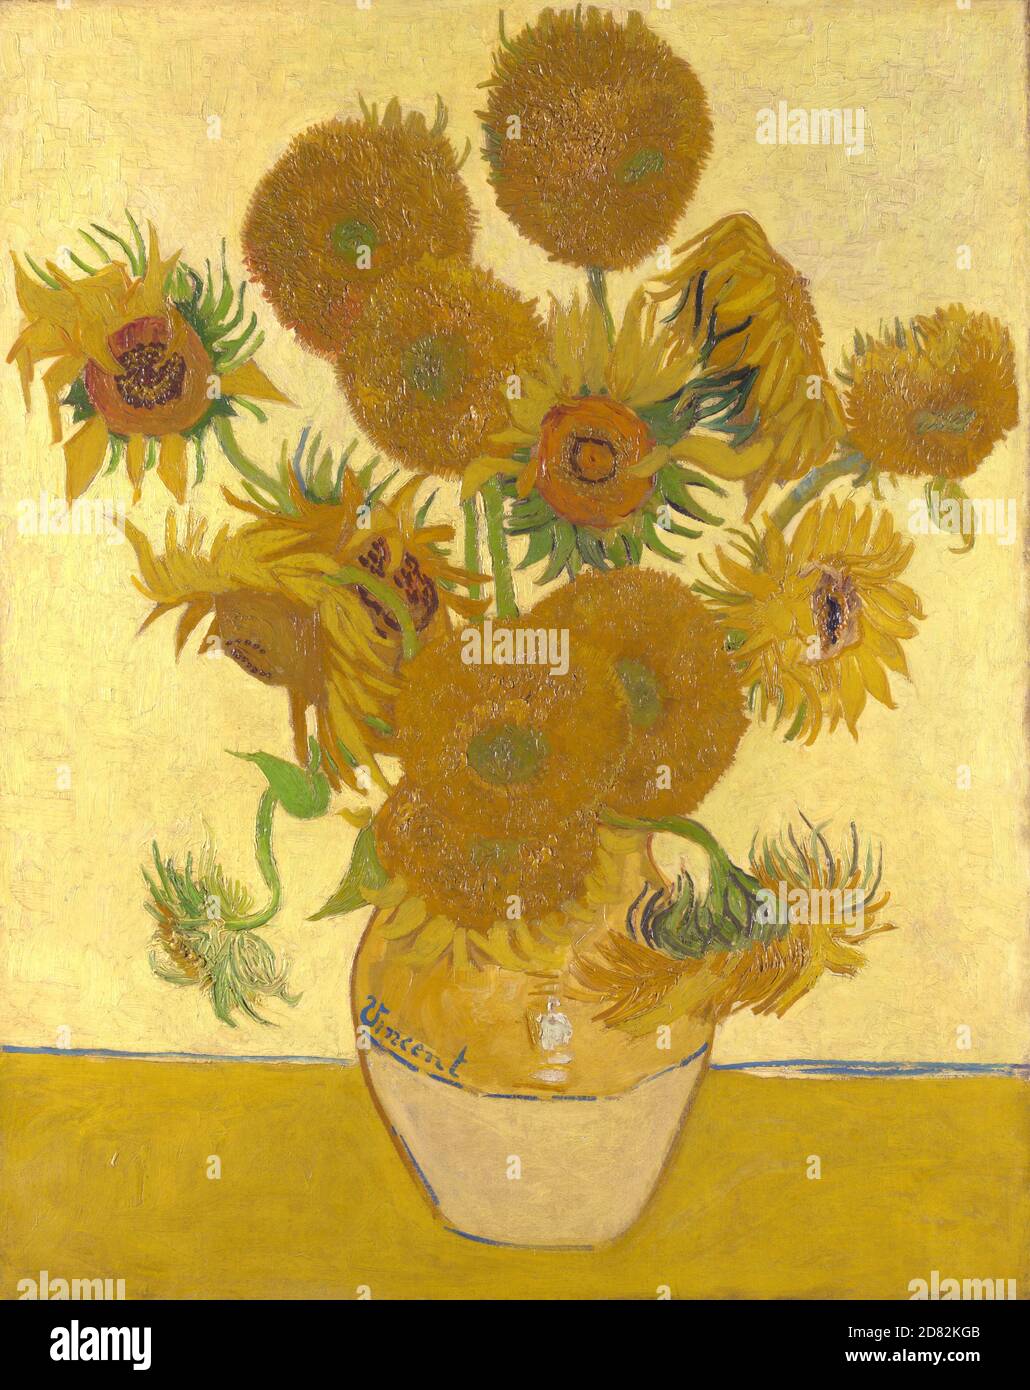 Title: Sunflowers Creator: Vincent van Gogh Date: 1888 Medium: Oil on canvas Dimensions: 92.1x73 cms Location: National Gallery, London Stock Photo